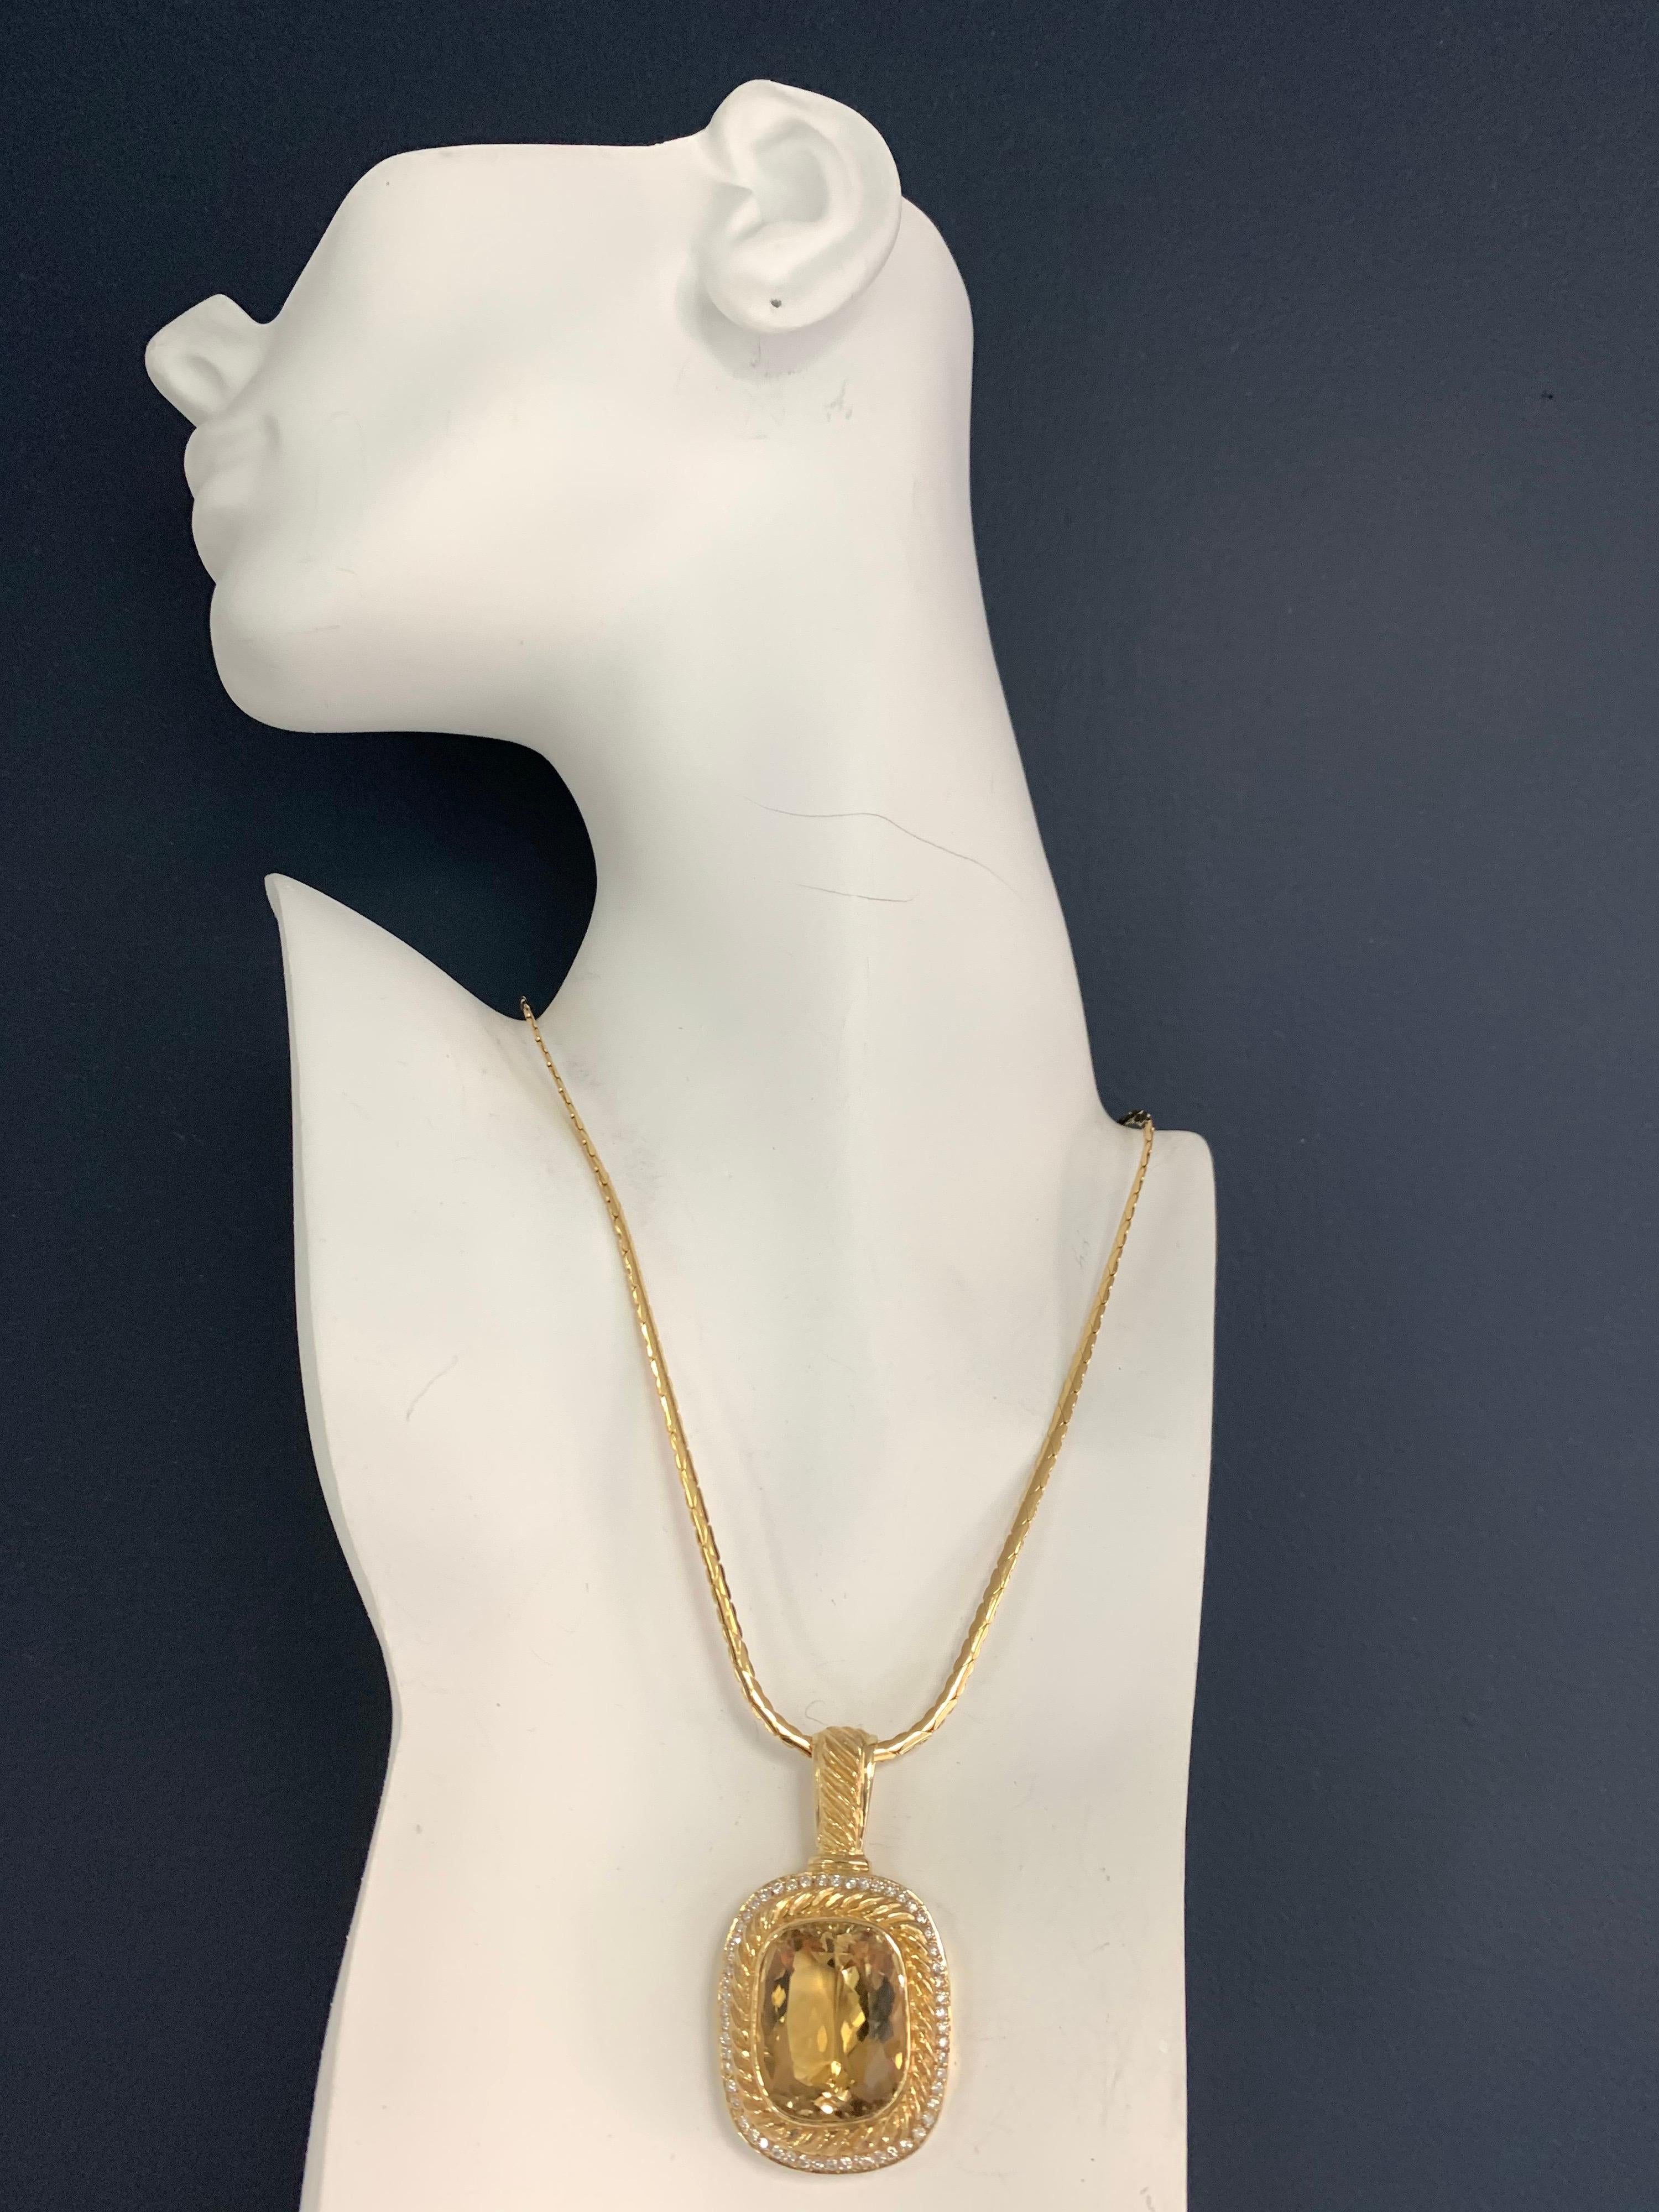 Retro 14K Gold Pendant (27.7 grams) set with an approximately 50 carat Natural Cushion Citrine Quartz measuring 24x20x11.9mm.

Surrounding the stone are 56 Natural Round Brilliant Diamonds approximately 0.65 carats, F in color and VS-SI in clarity.